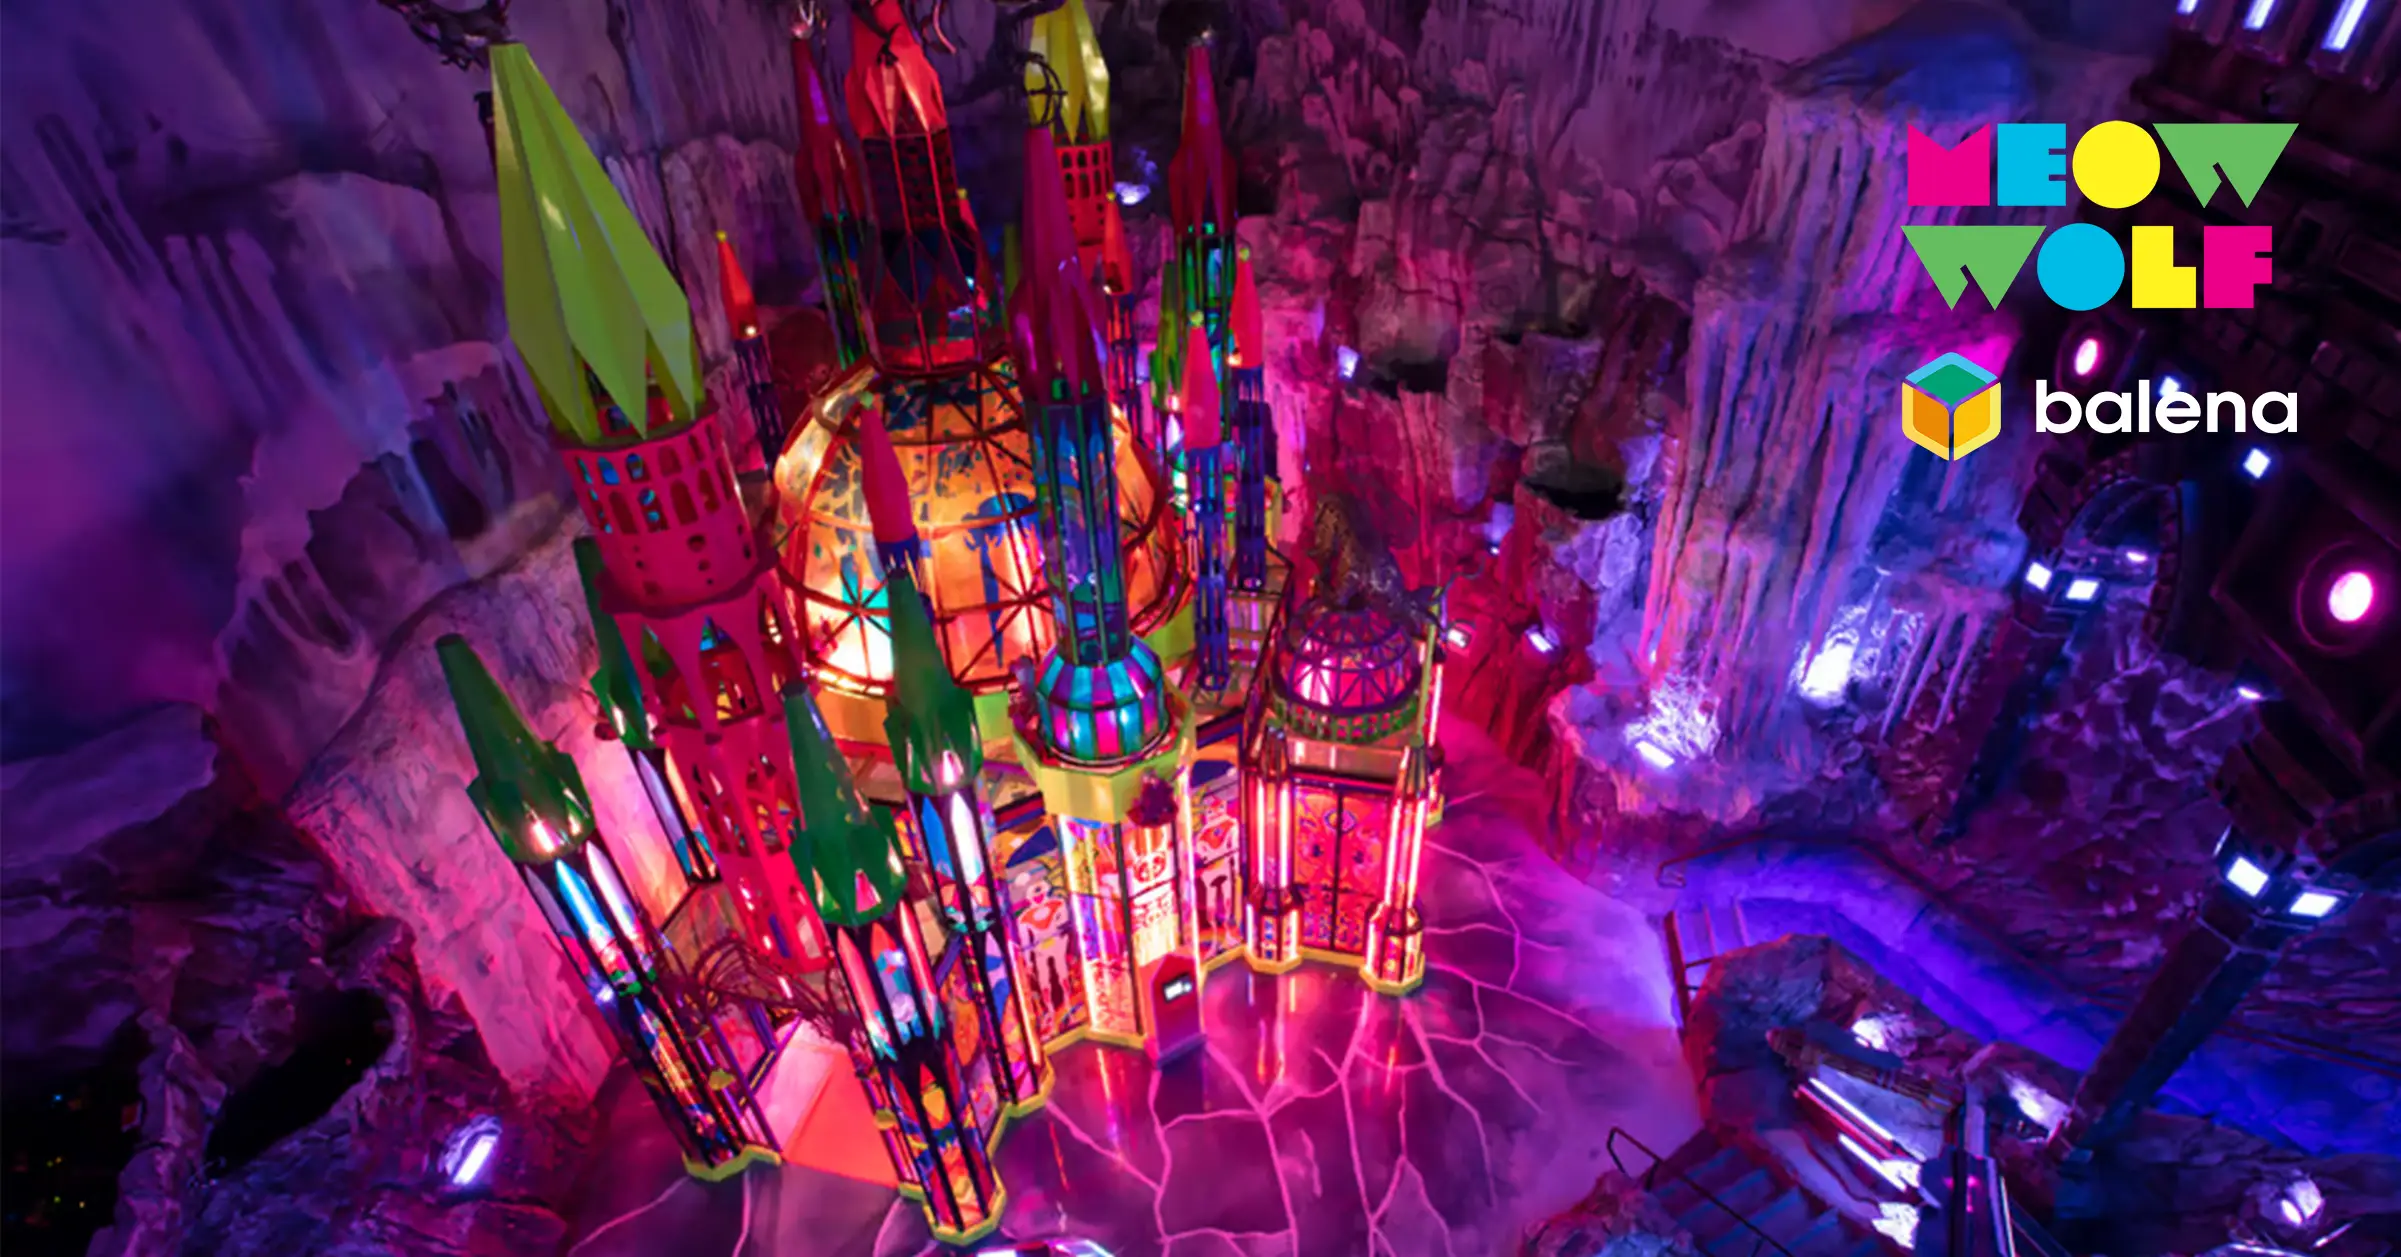 Meow Wolf: Running smart art exhibitions with balena